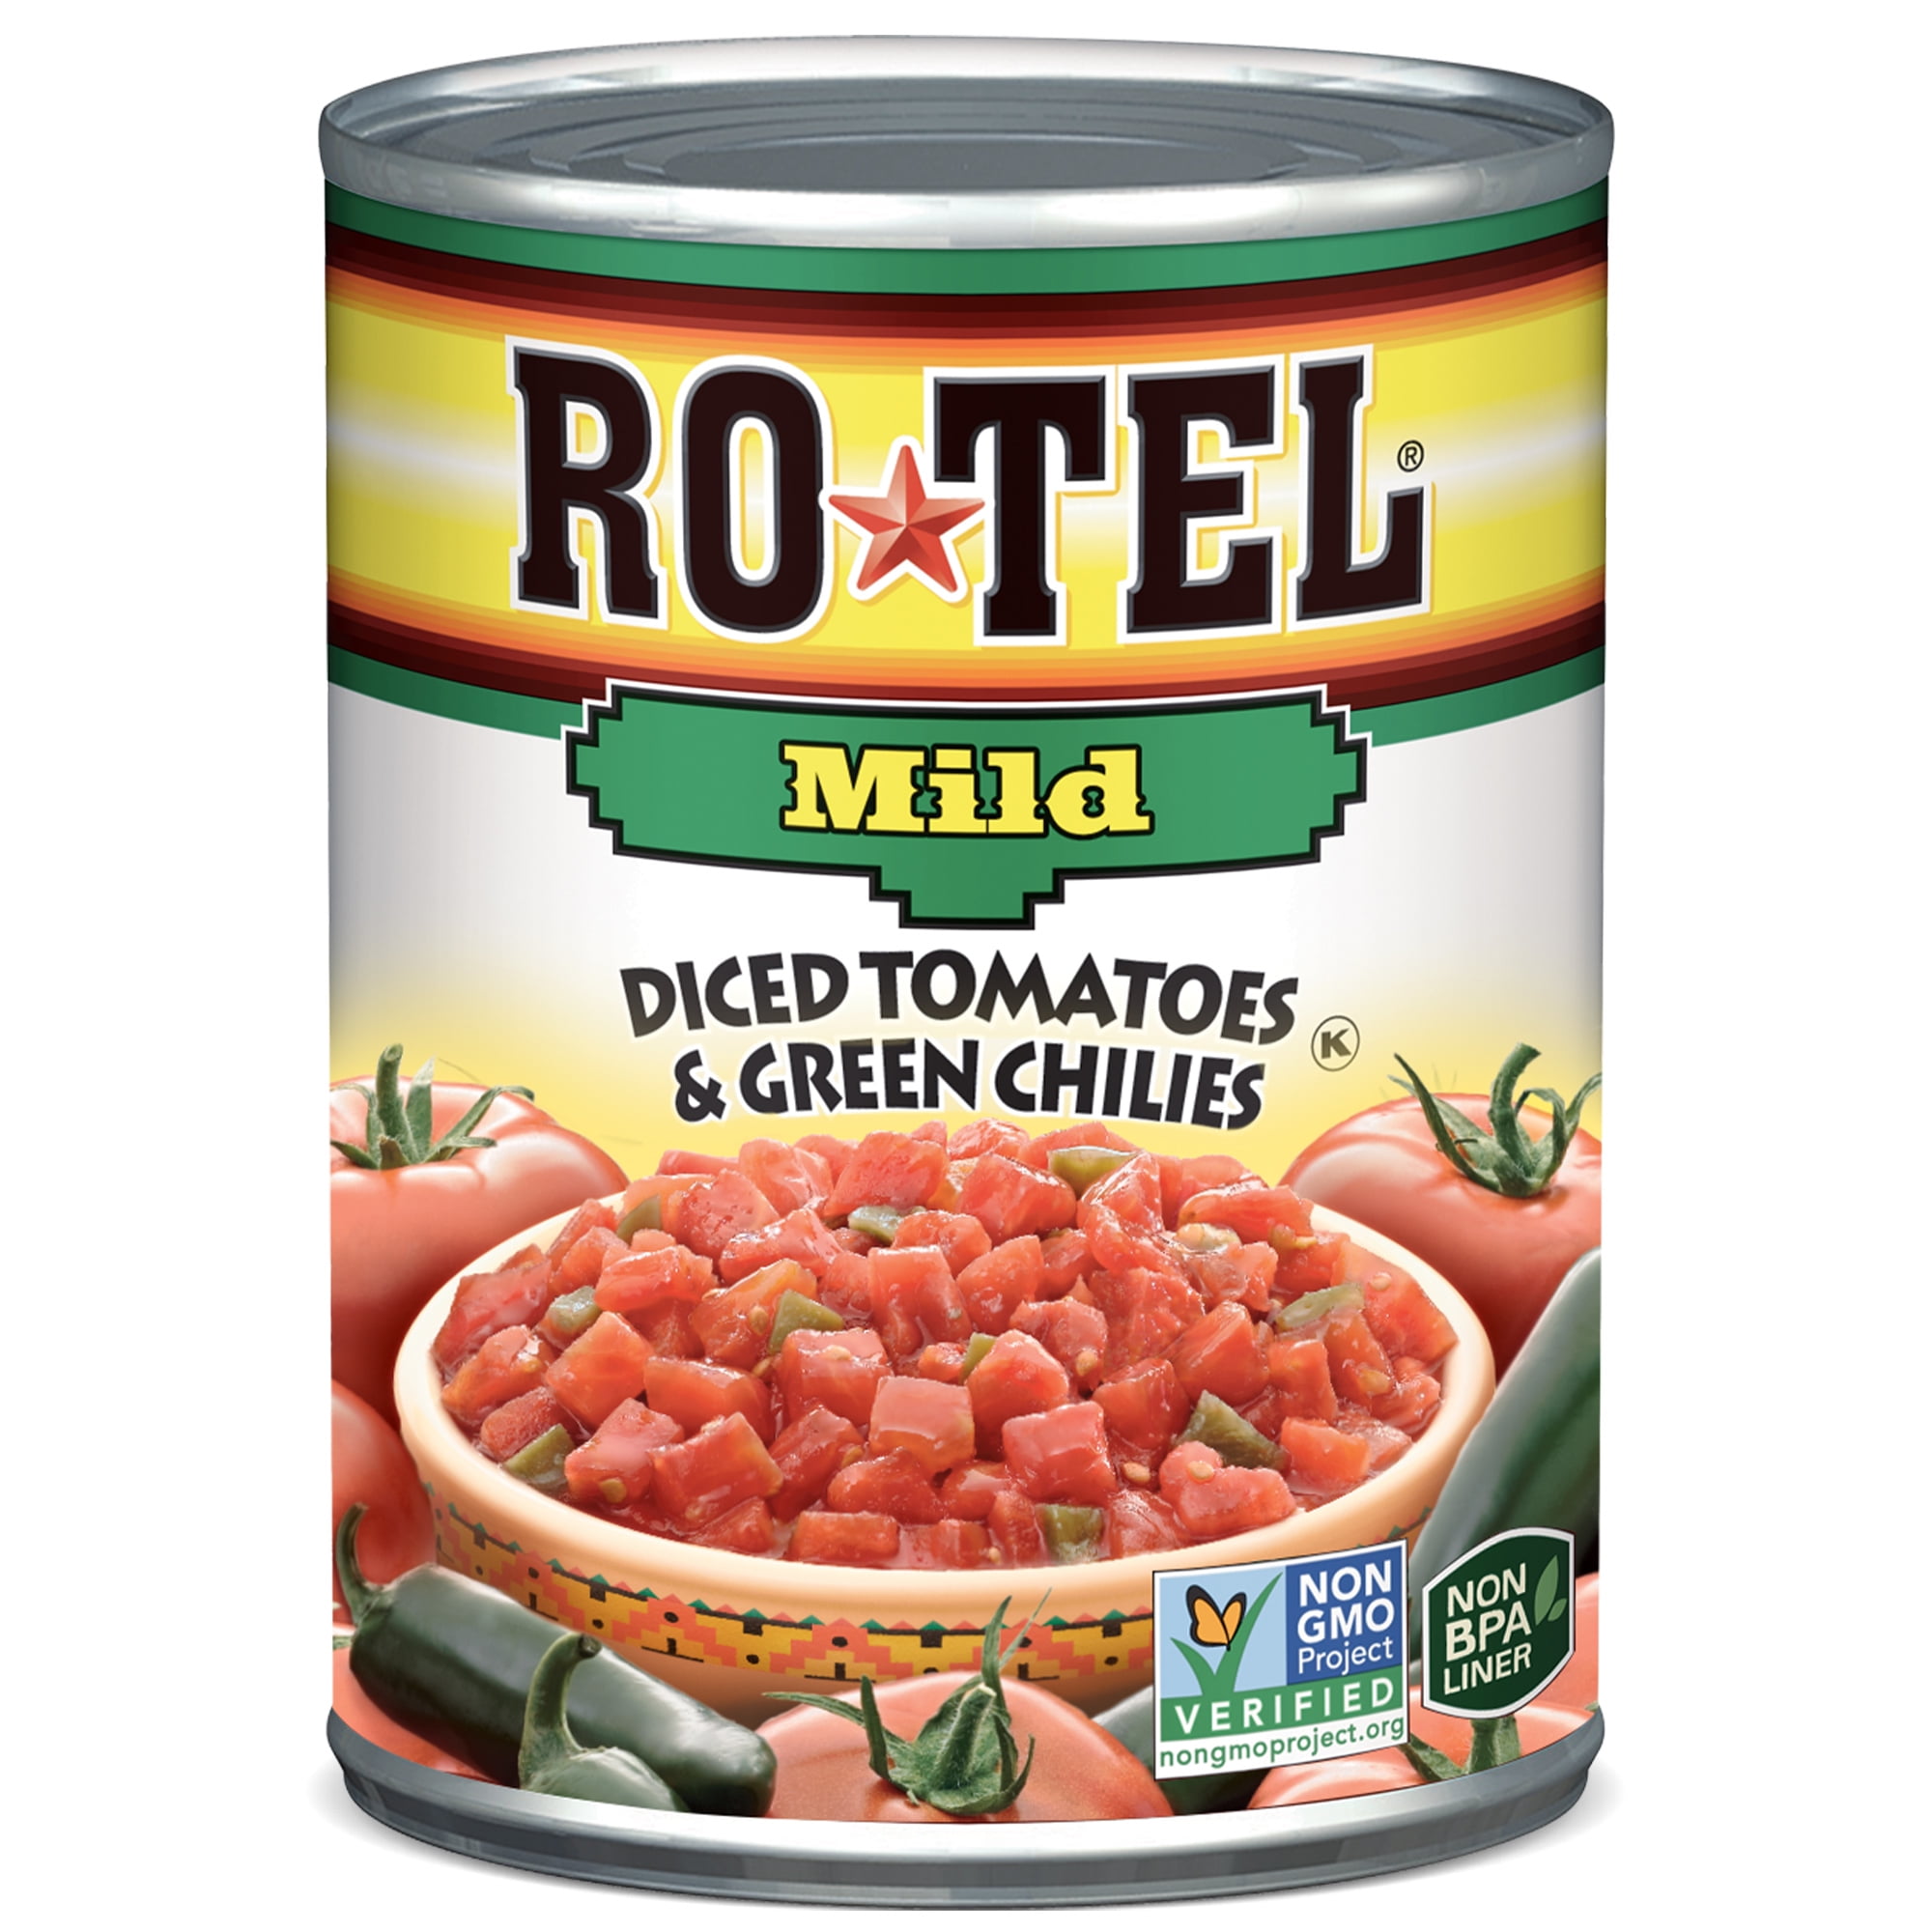 Rotel Mild Diced Tomatoes and Green Chilies, 10 oz